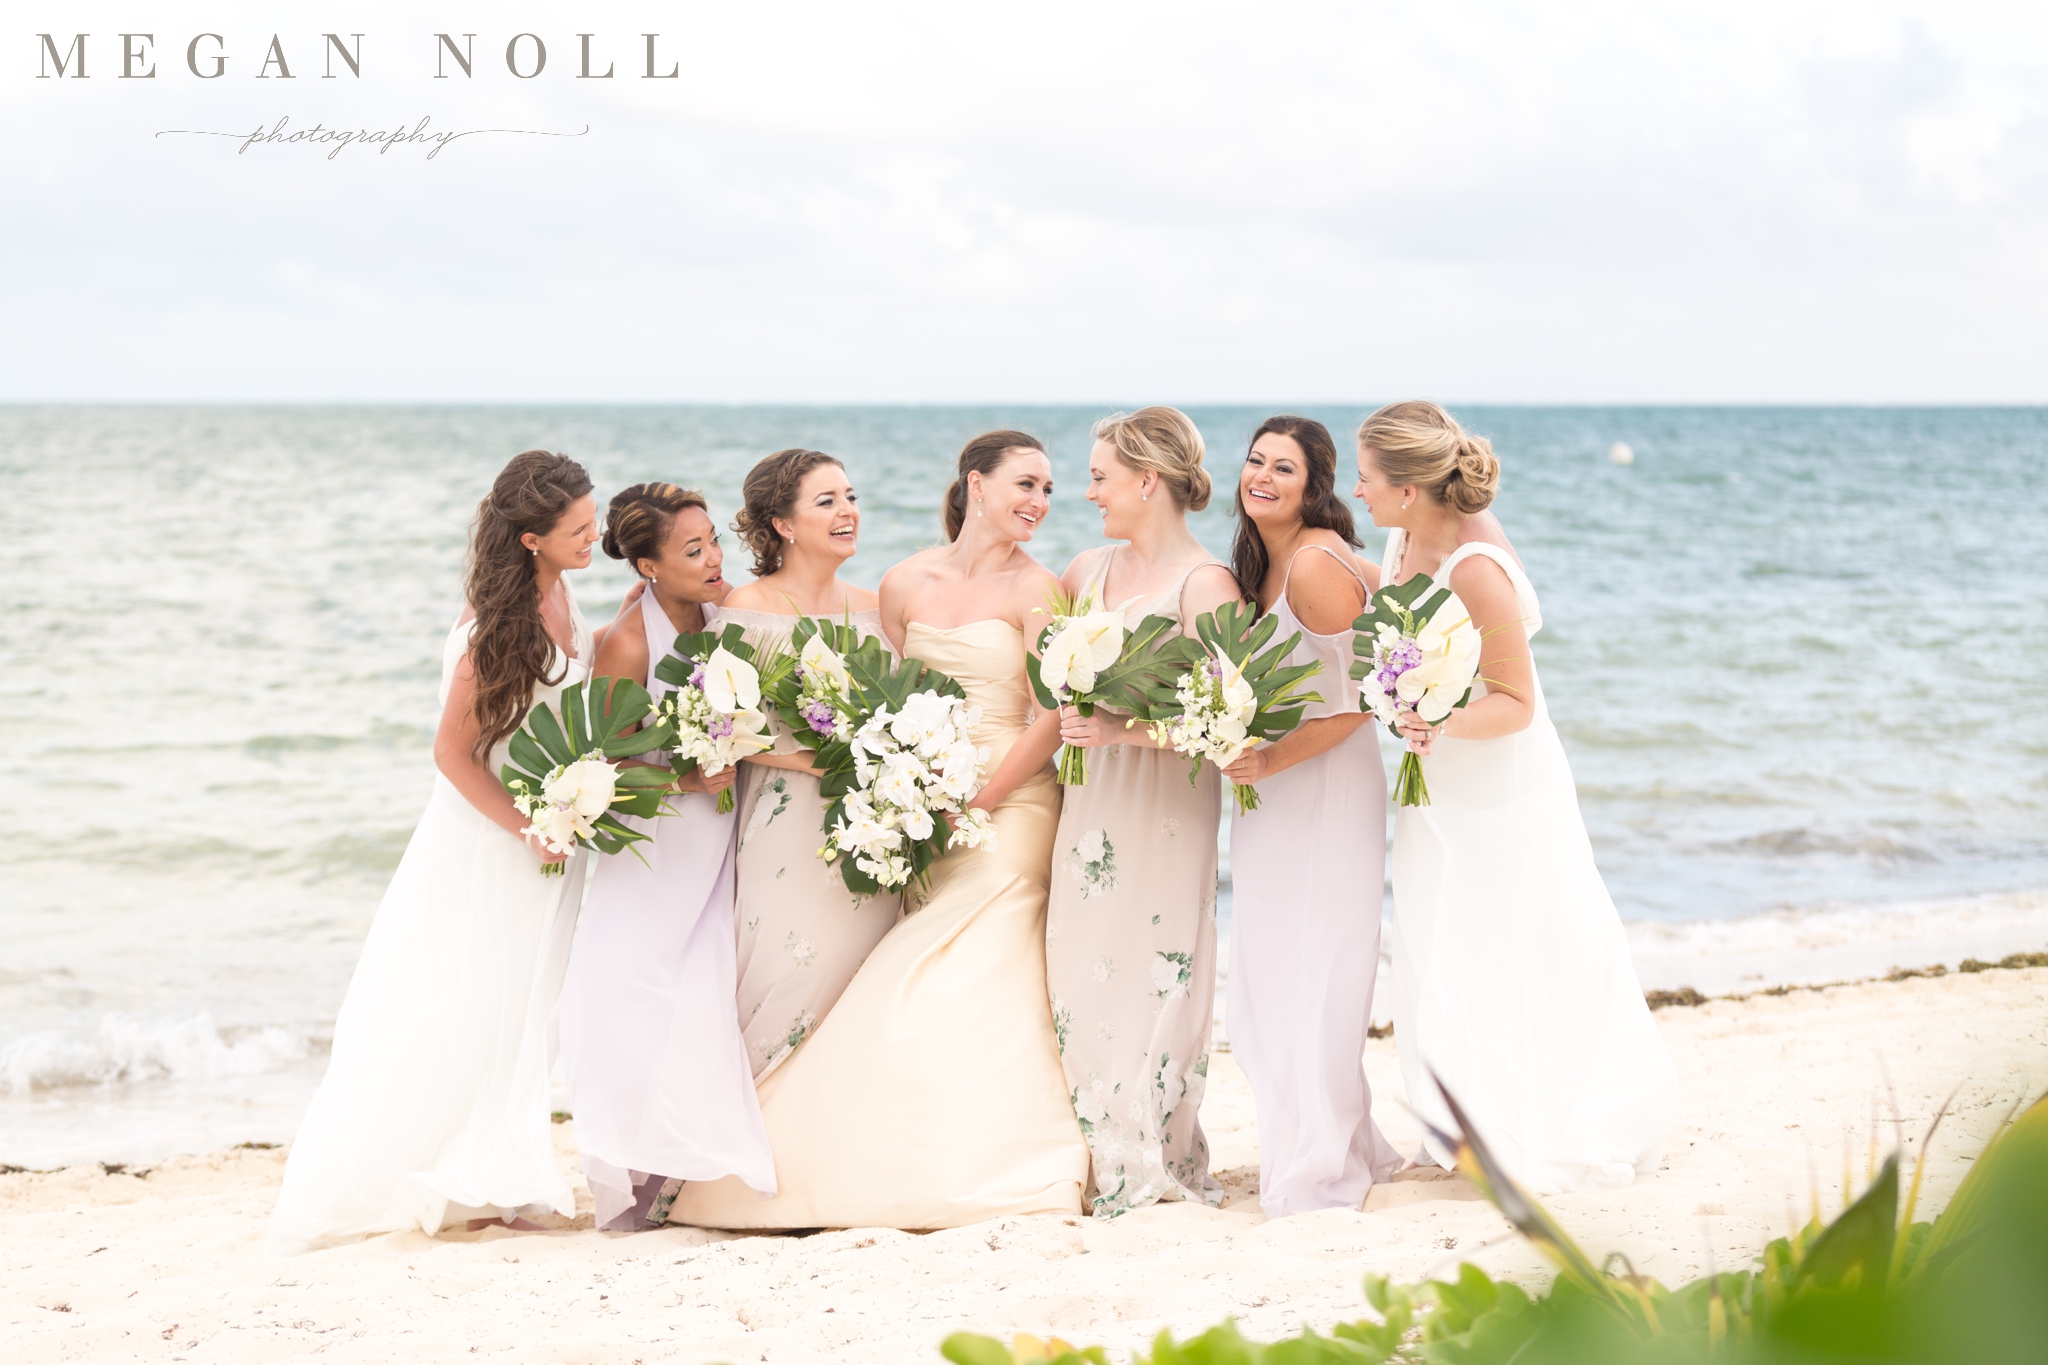 Bride and Bridesmaids at Beach, Bring your own photographer